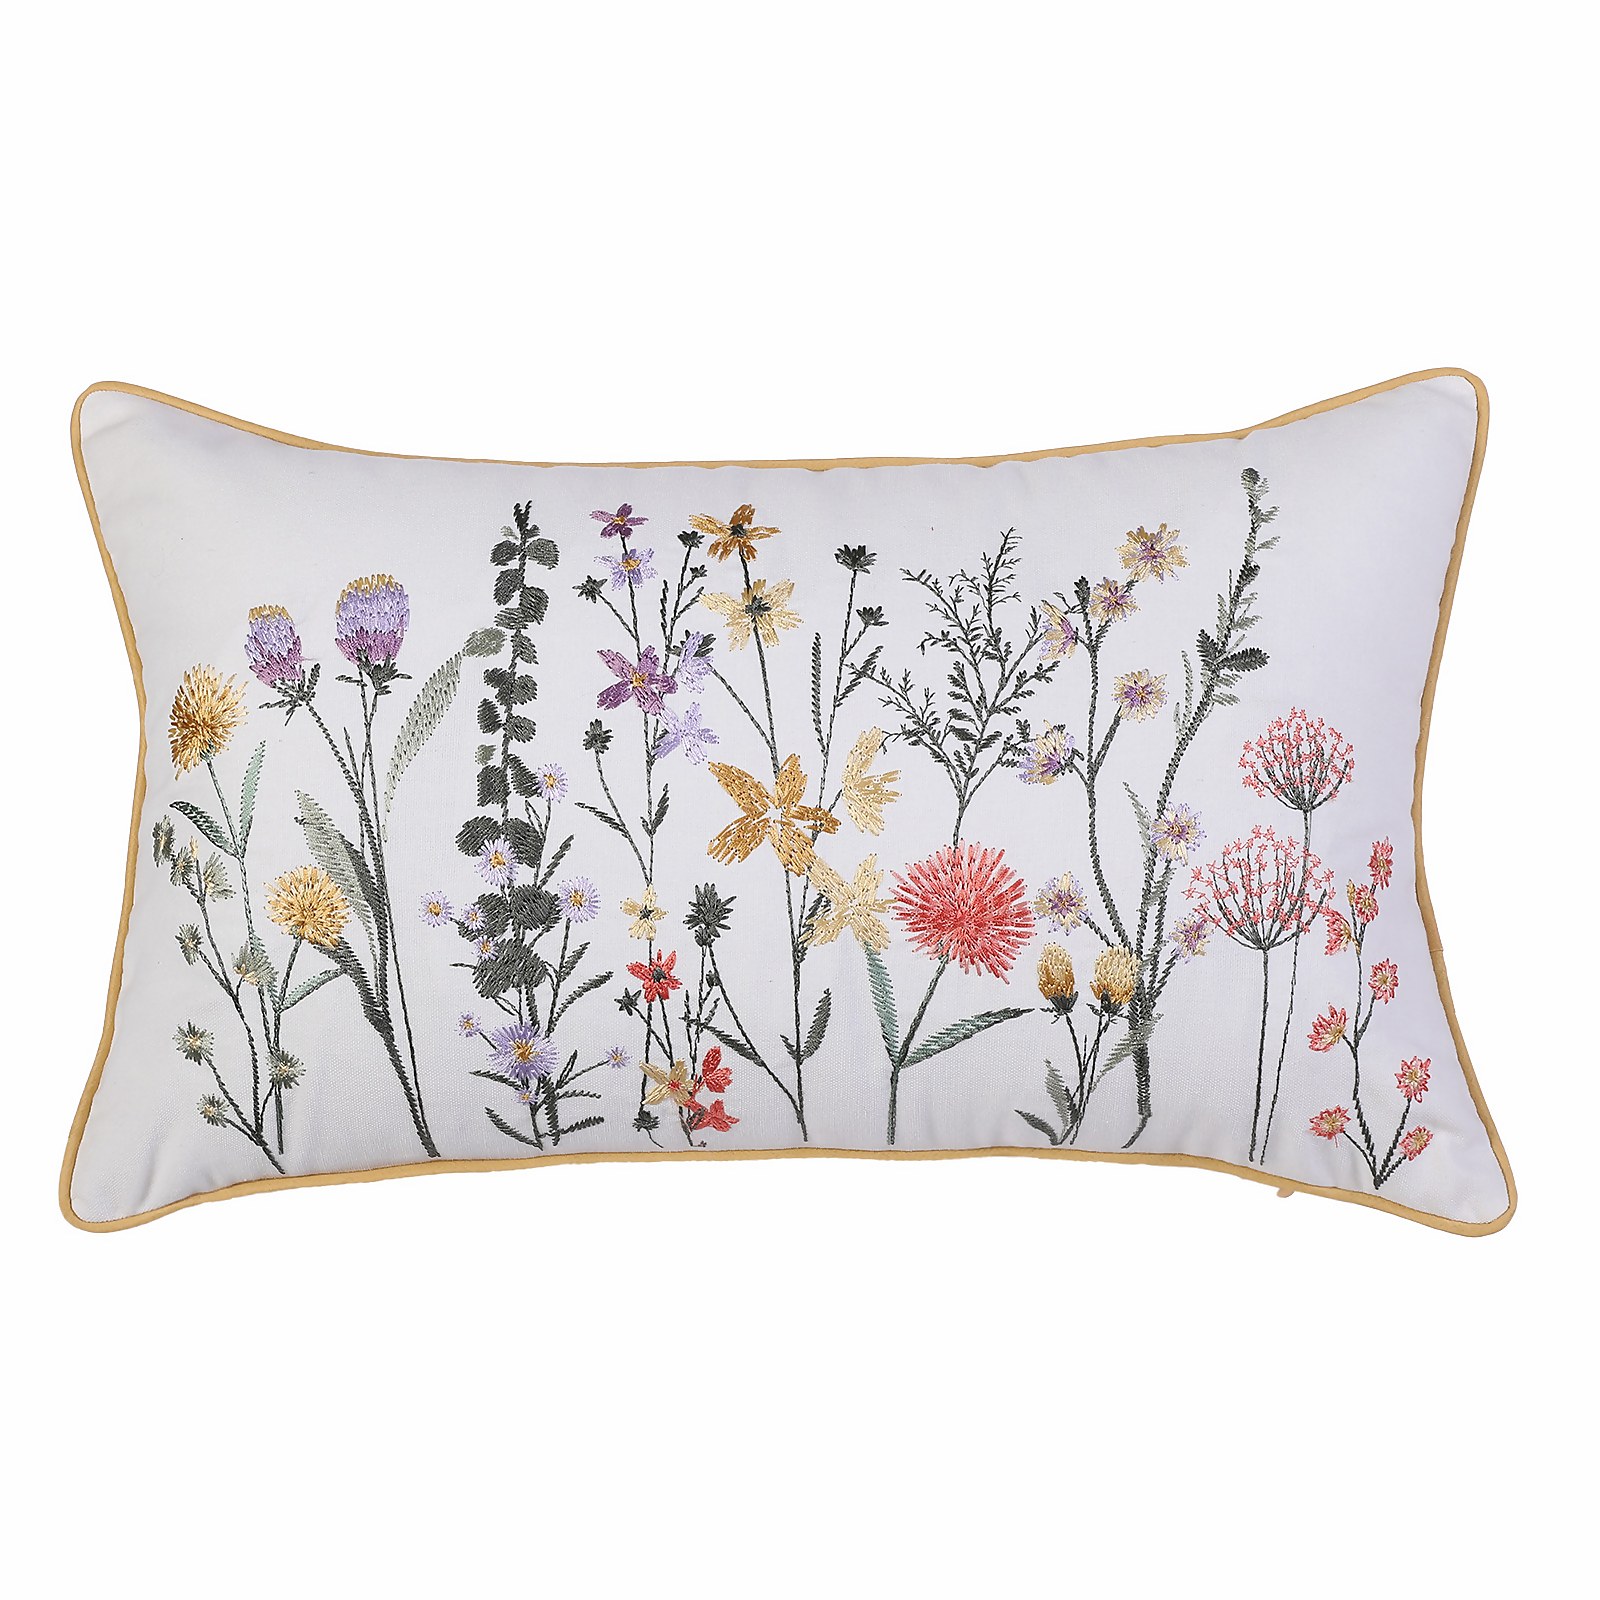 Embroidered Floral Cushion - 30x50cm